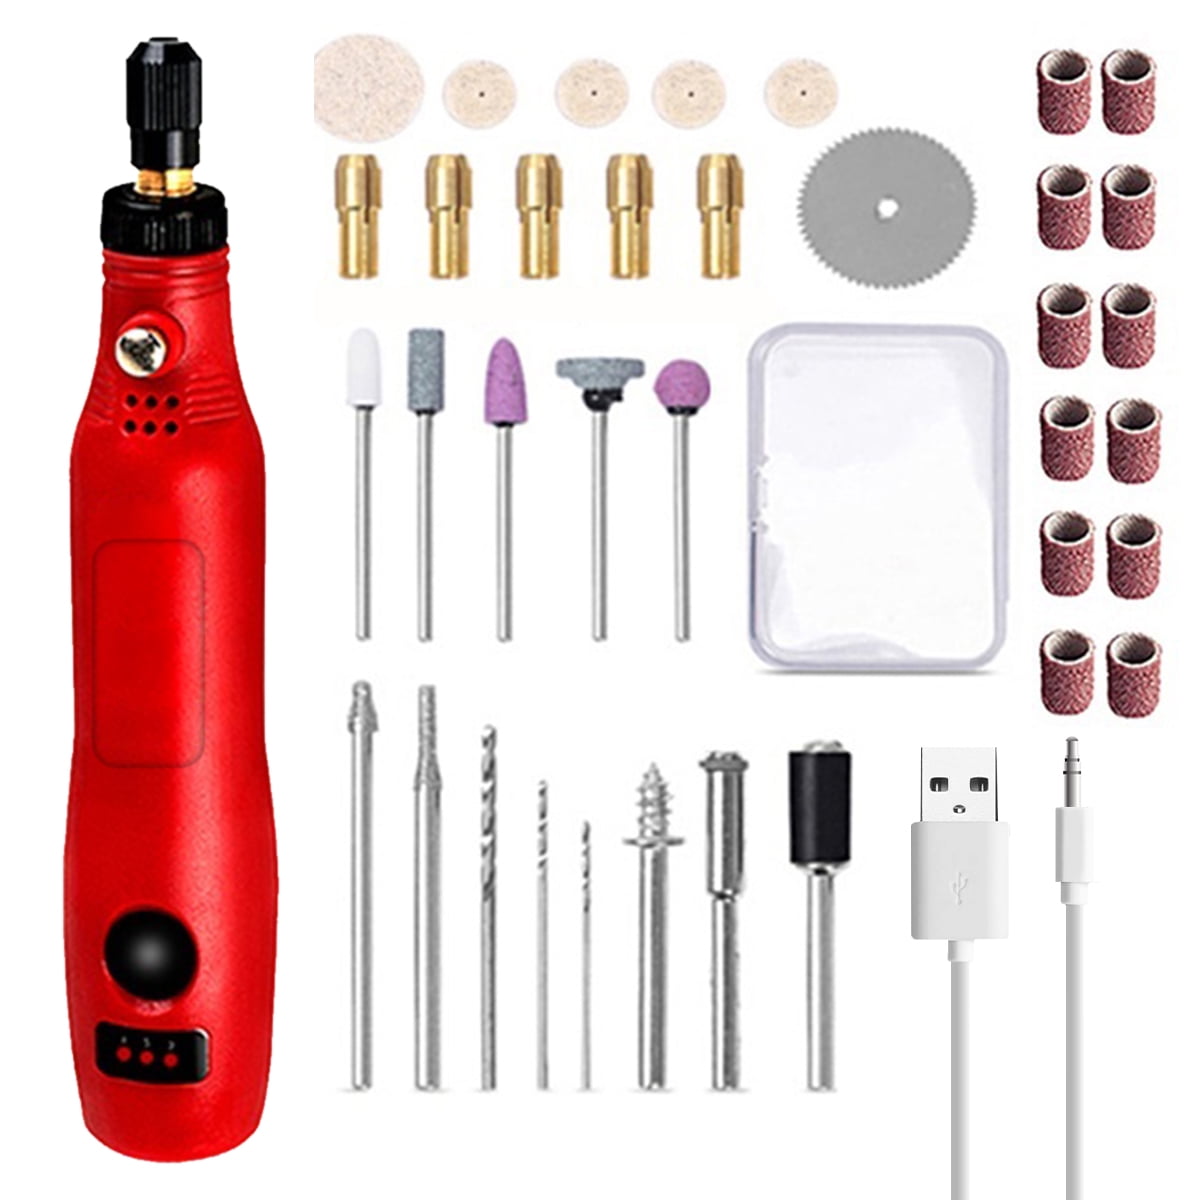 Cordless Rotary Tool Adjustable Speed Mini Electric Grinder Rechargeable  Engraving Pen with 3 Speed and 36Pcs Accessories for Sanding Polishing  Drilling Carving 